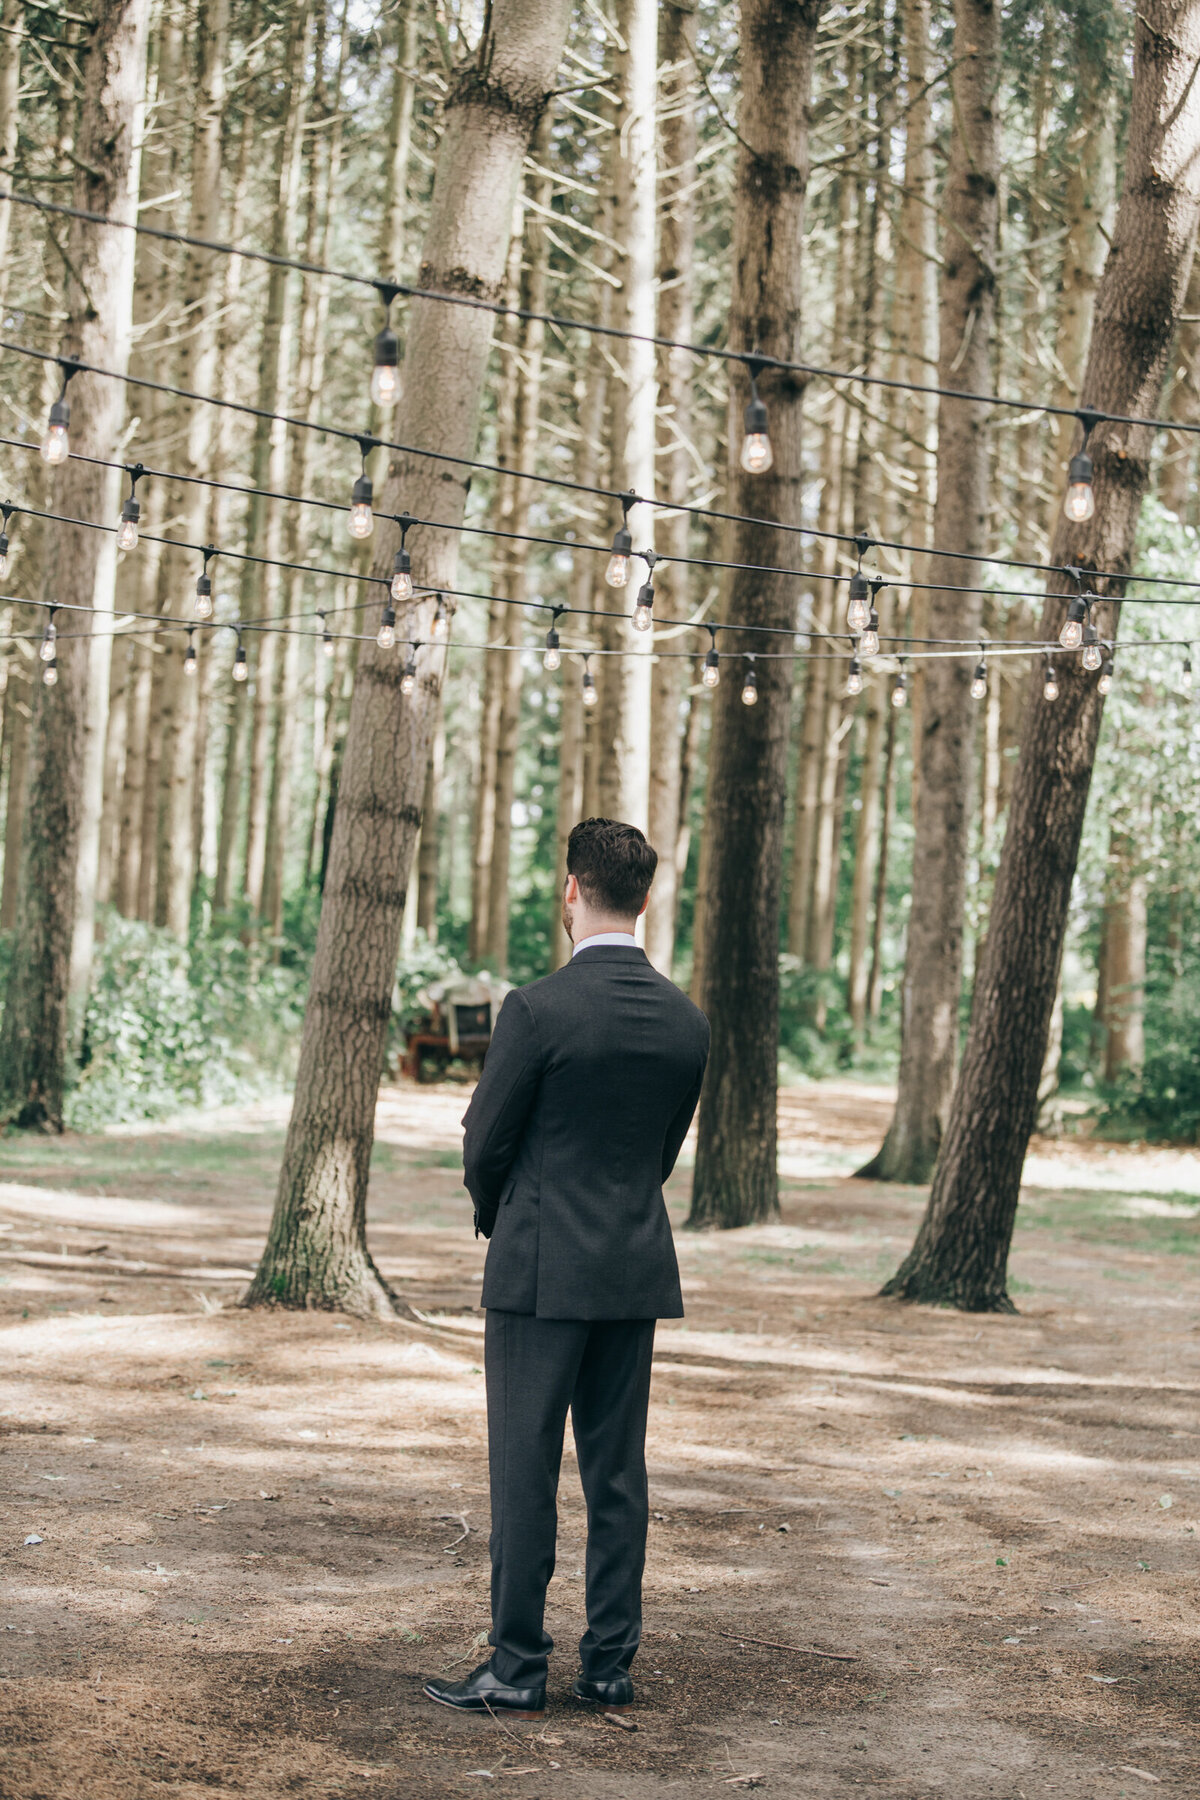 A groom waiting for his bride in an enchanted forest for a romantic first look